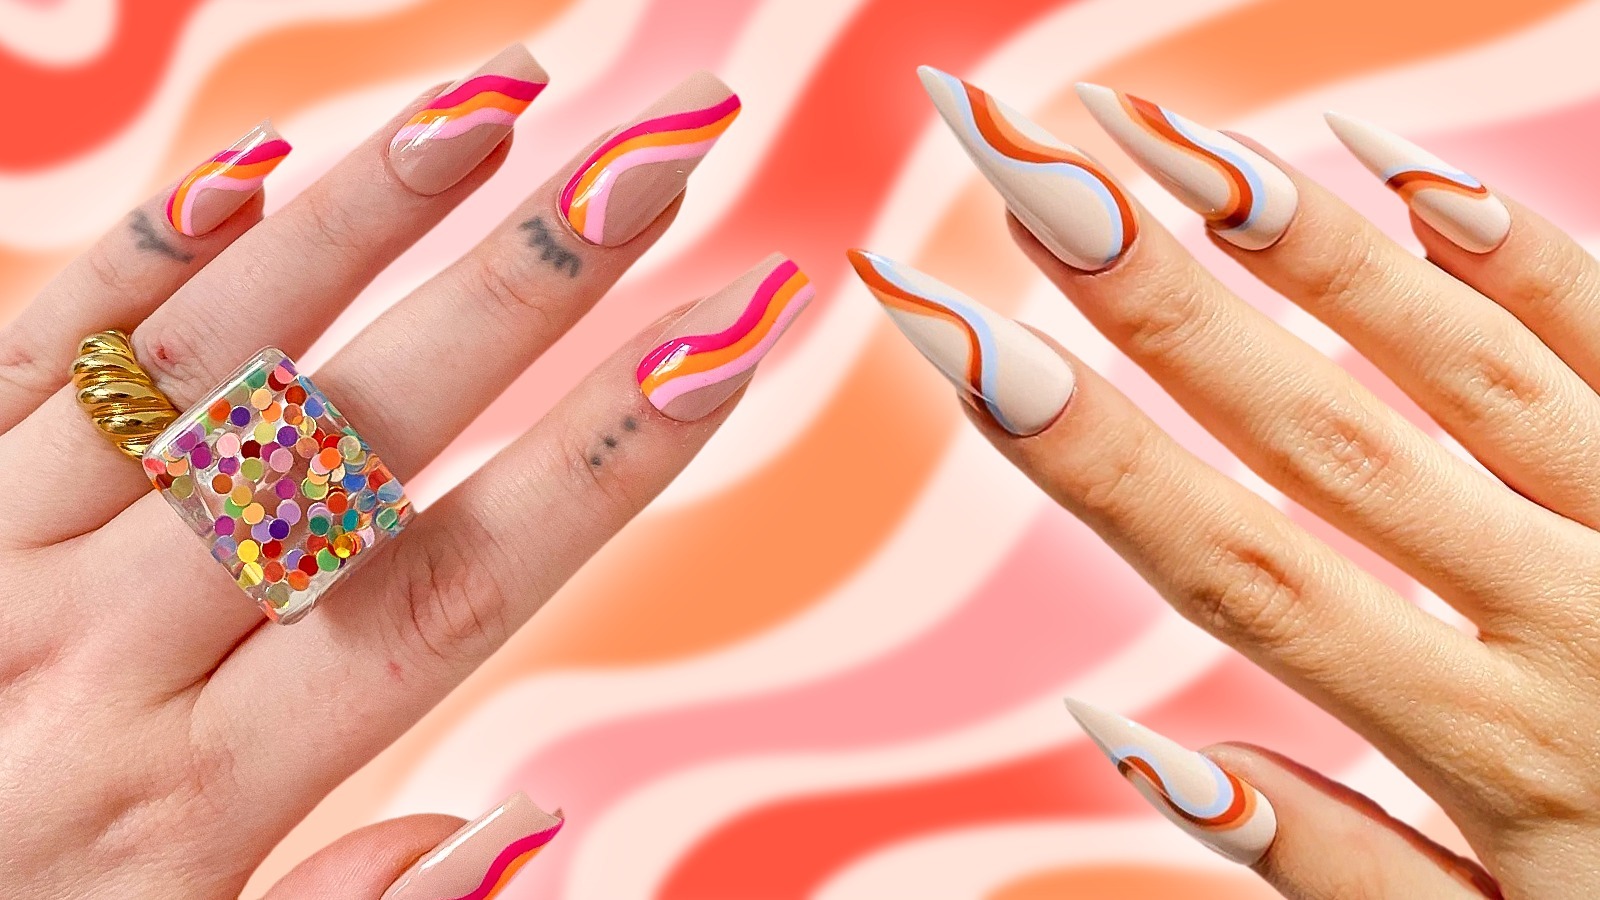 Fall Nail Trends: From Macchiato Manis to Retro Prints